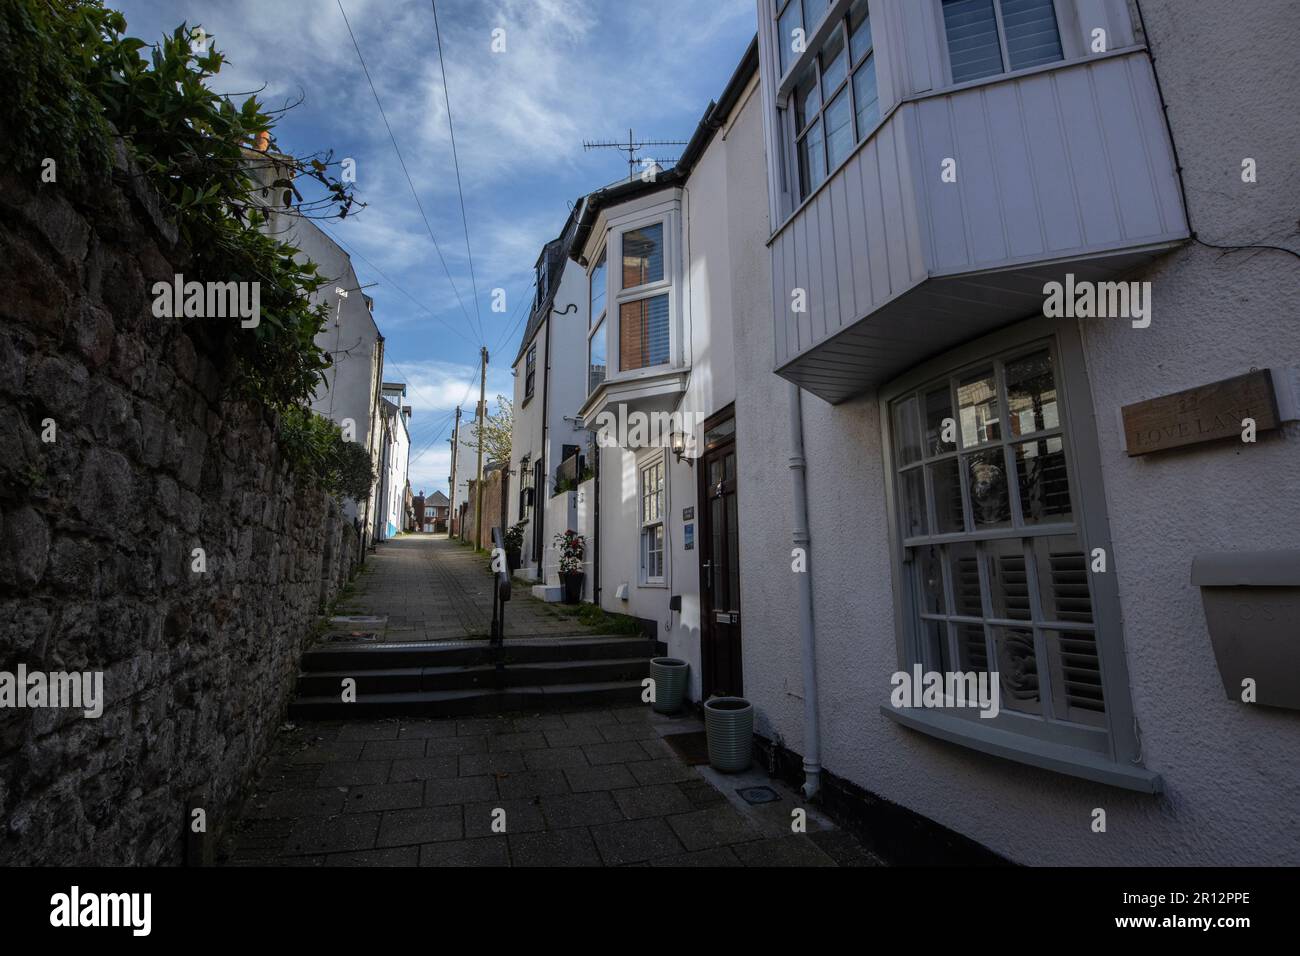 „Love Lane“, Weymouth Old Town and Harbour, Weymouth, Dorset, England, Großbritannien Stockfoto